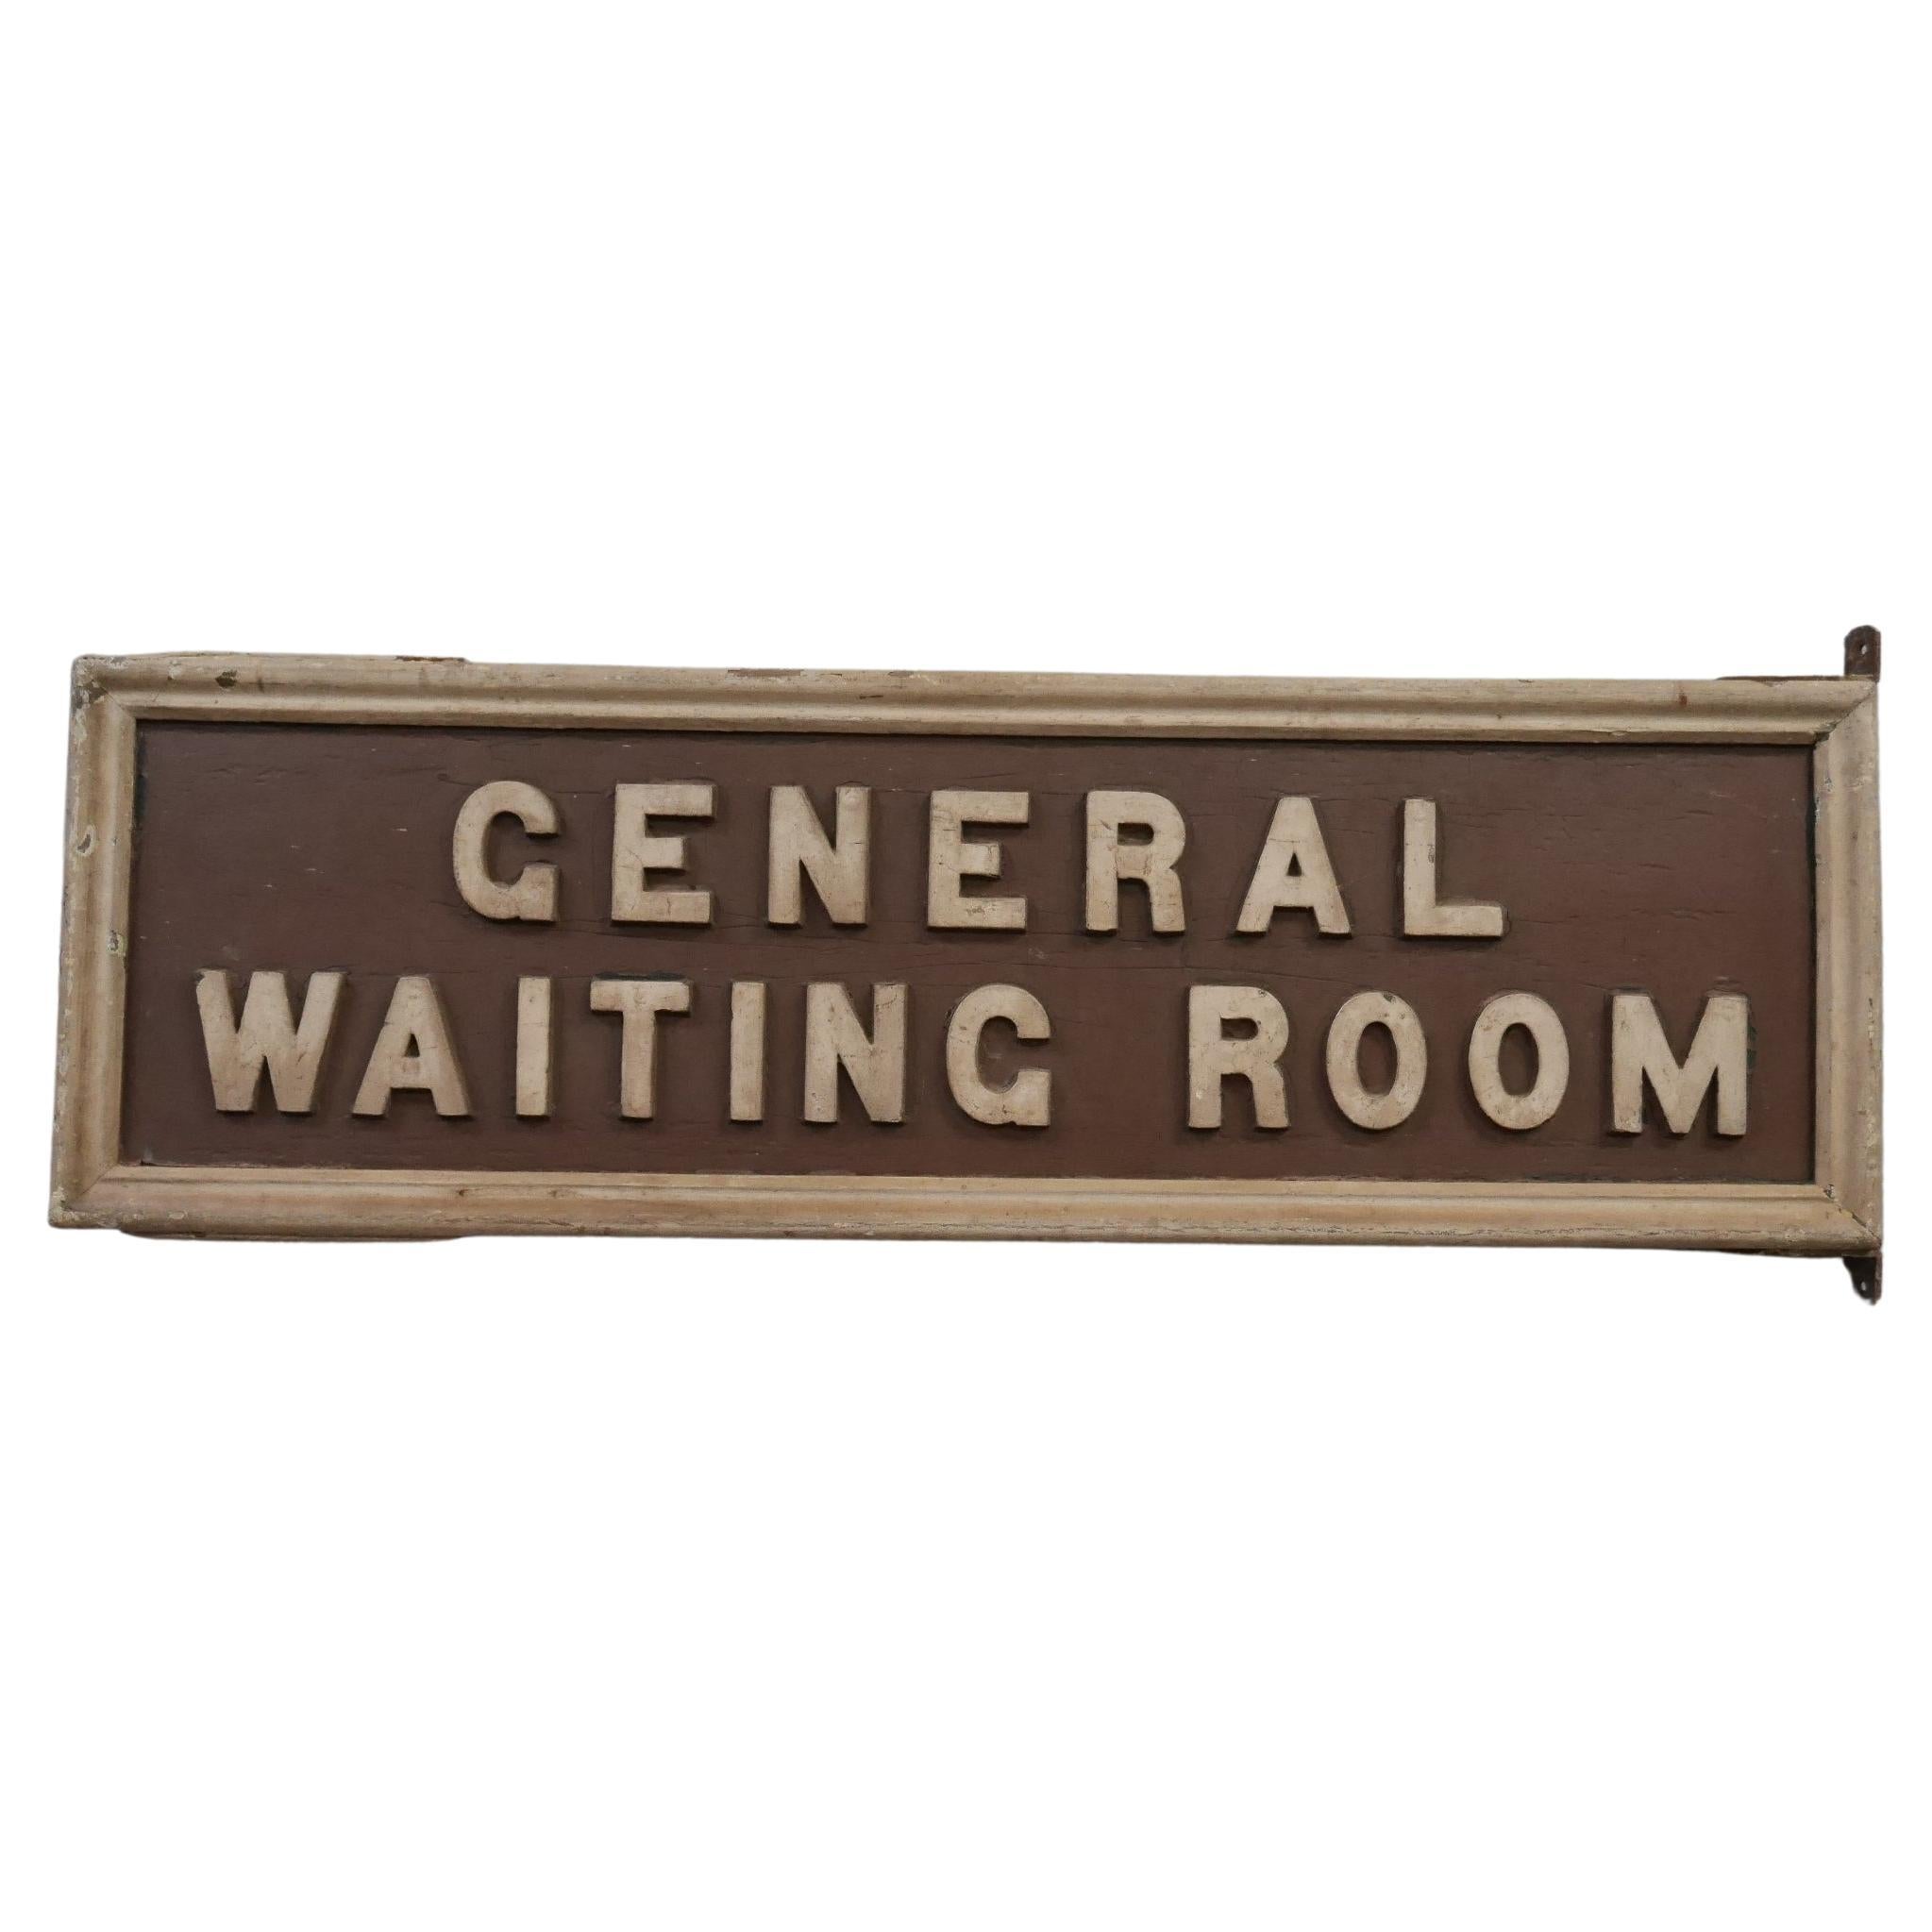 Early Timber & Iron 'General Waiting Room' Railway Sign